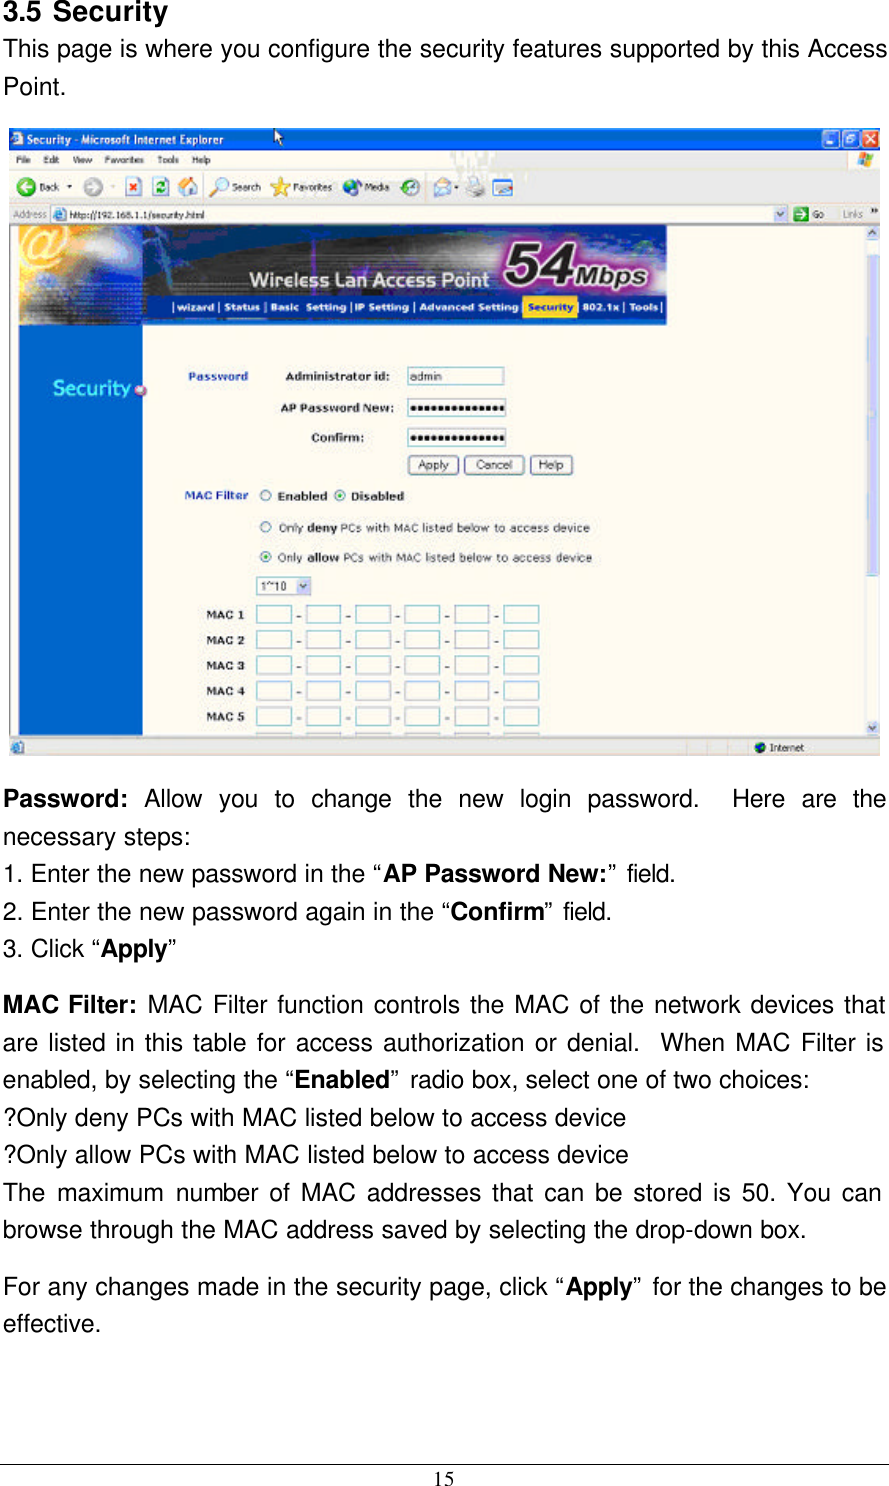 15 3.5 Security This page is where you configure the security features supported by this Access Point.  Password:  Allow you to change the new login password.  Here are the necessary steps: 1. Enter the new password in the “AP Password New:” field. 2. Enter the new password again in the “Confirm” field. 3. Click “Apply” MAC Filter: MAC Filter function controls the MAC of the network devices that are listed in this table for access authorization or denial.  When MAC Filter is enabled, by selecting the “Enabled” radio box, select one of two choices: ?Only deny PCs with MAC listed below to access device ?Only allow PCs with MAC listed below to access device The maximum number of MAC addresses that can be stored is 50. You can browse through the MAC address saved by selecting the drop-down box. For any changes made in the security page, click “Apply” for the changes to be effective.  